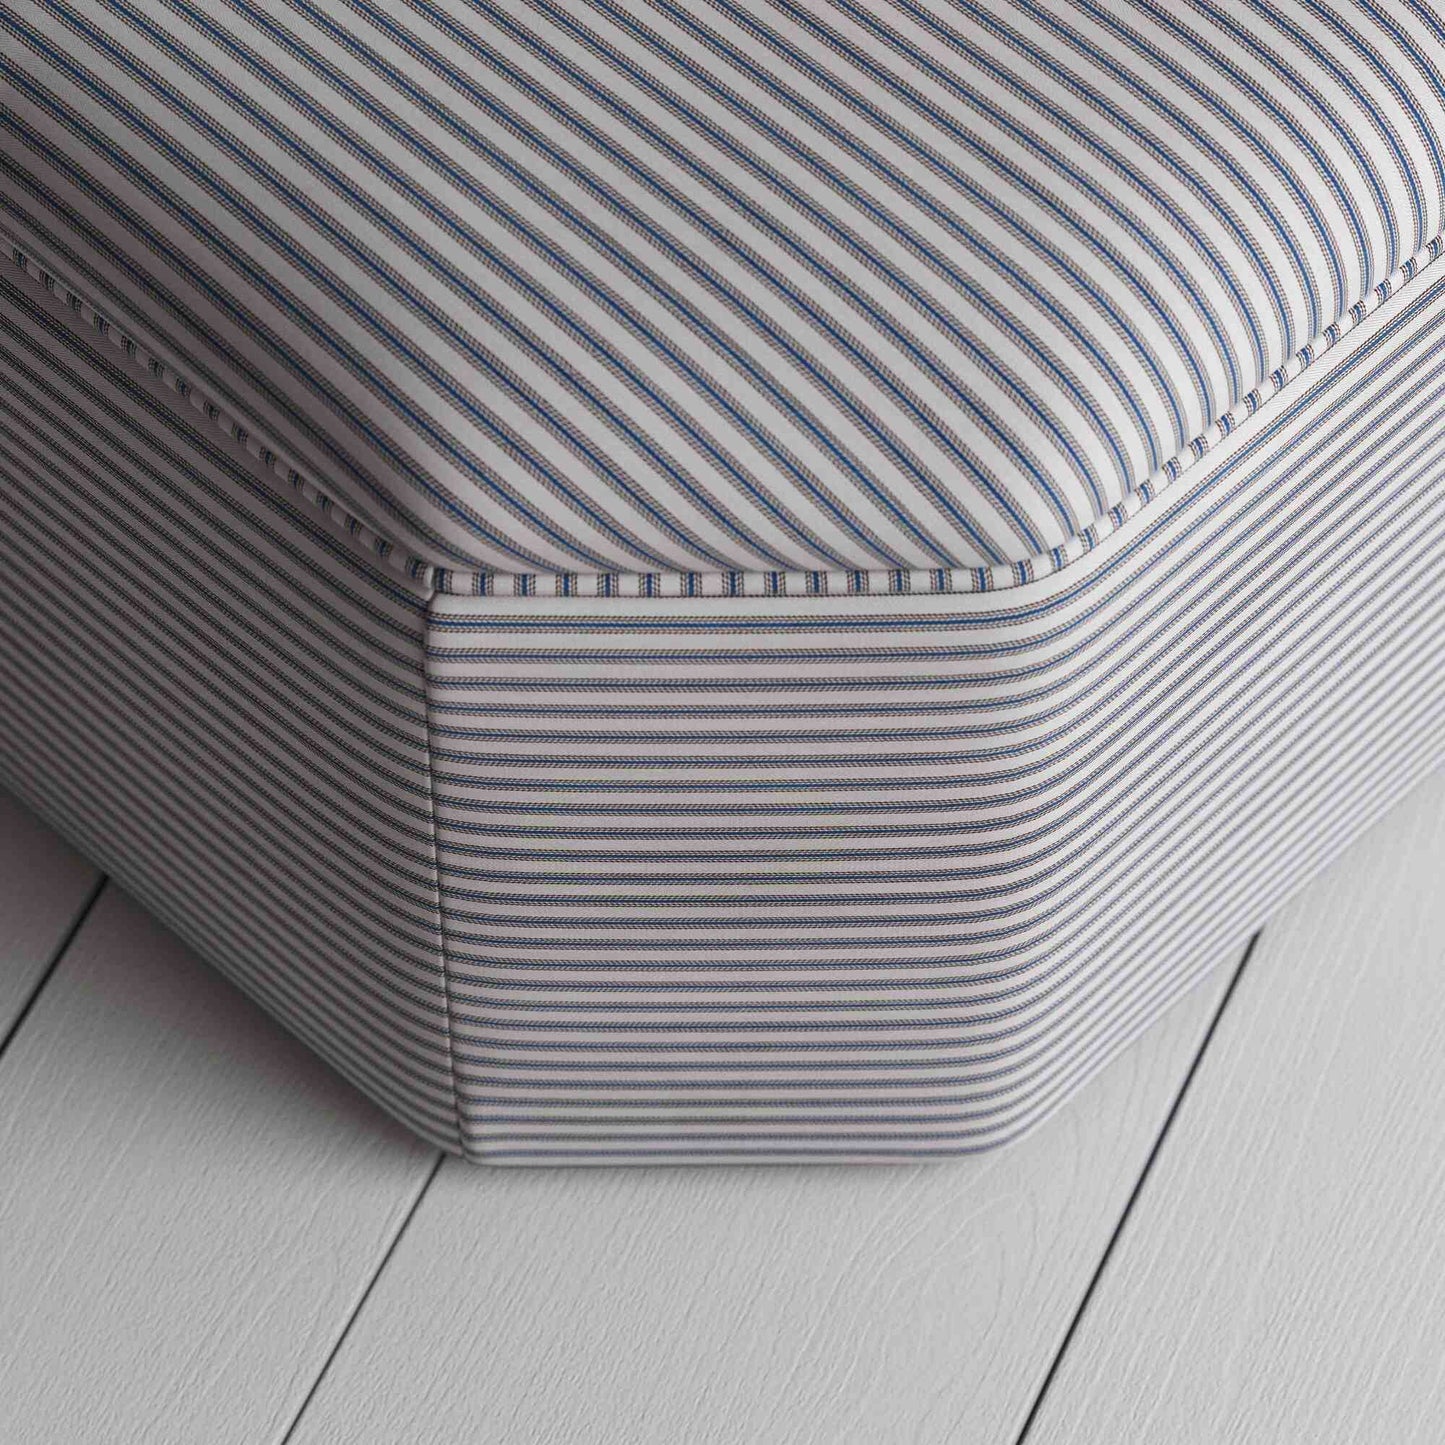 Hither Hexagonal Ottoman in Ticking Cotton, Blue Brown